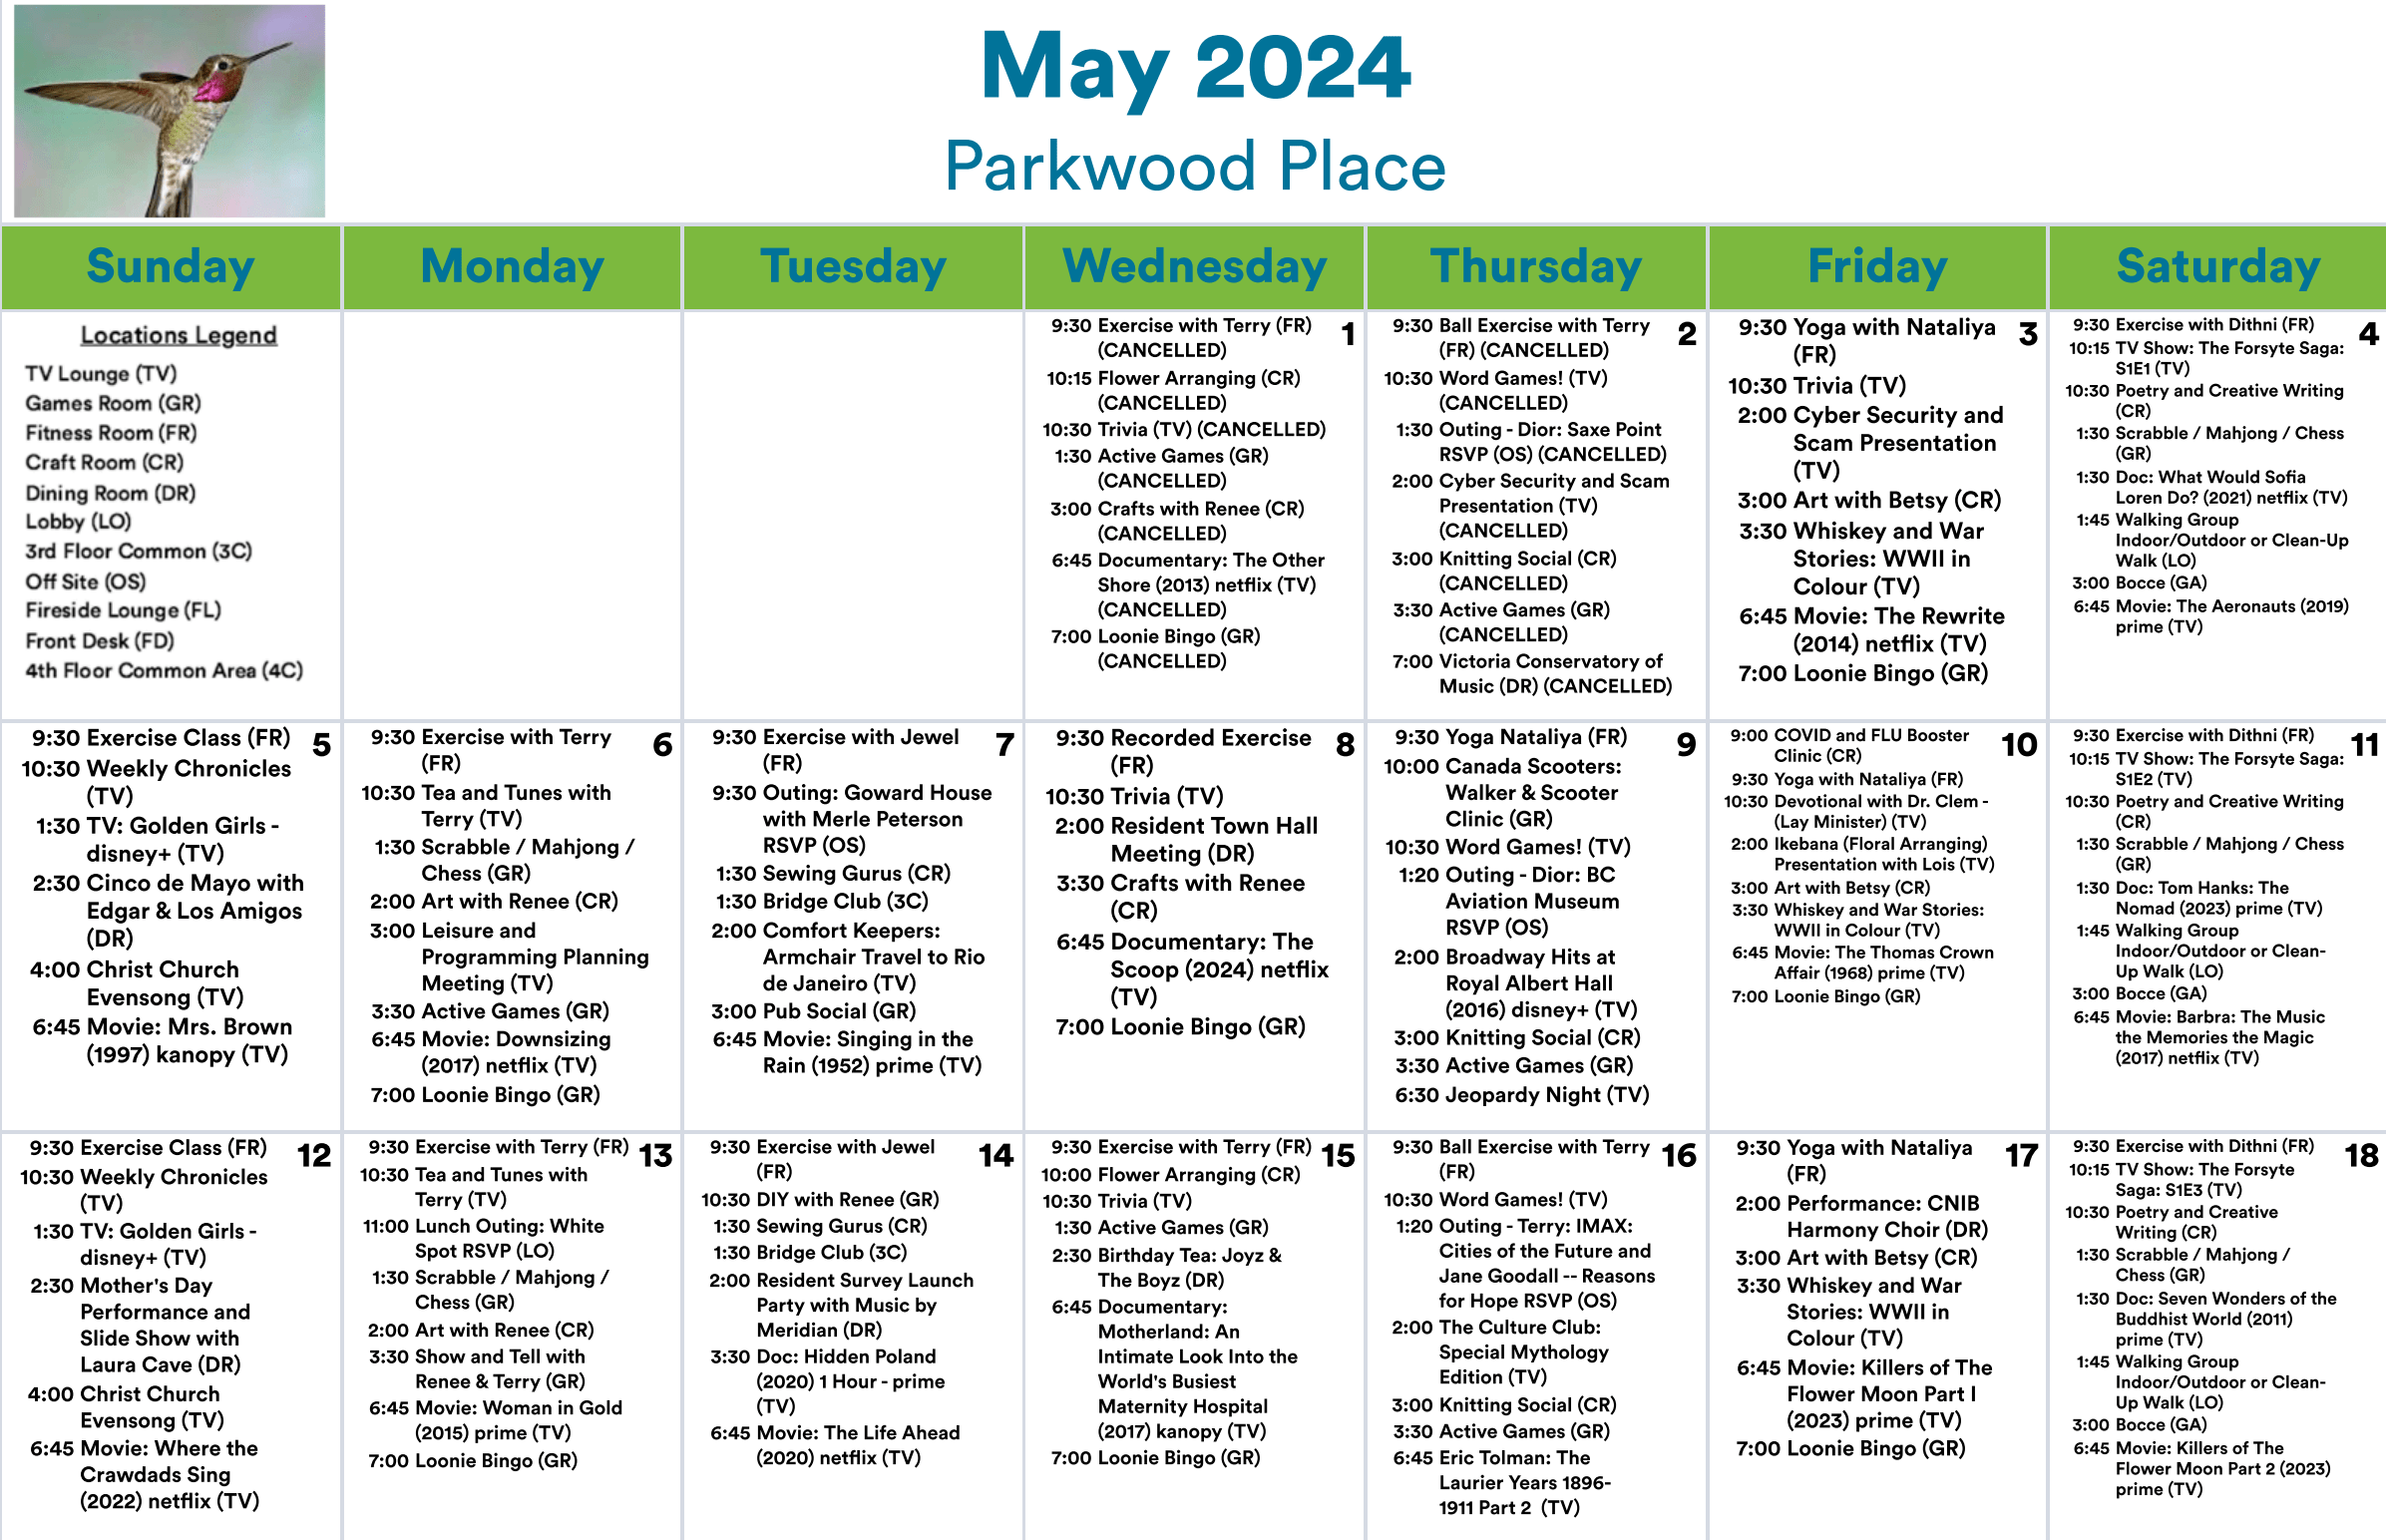 Parkwood Place May 1 - 18 2024 event calendar